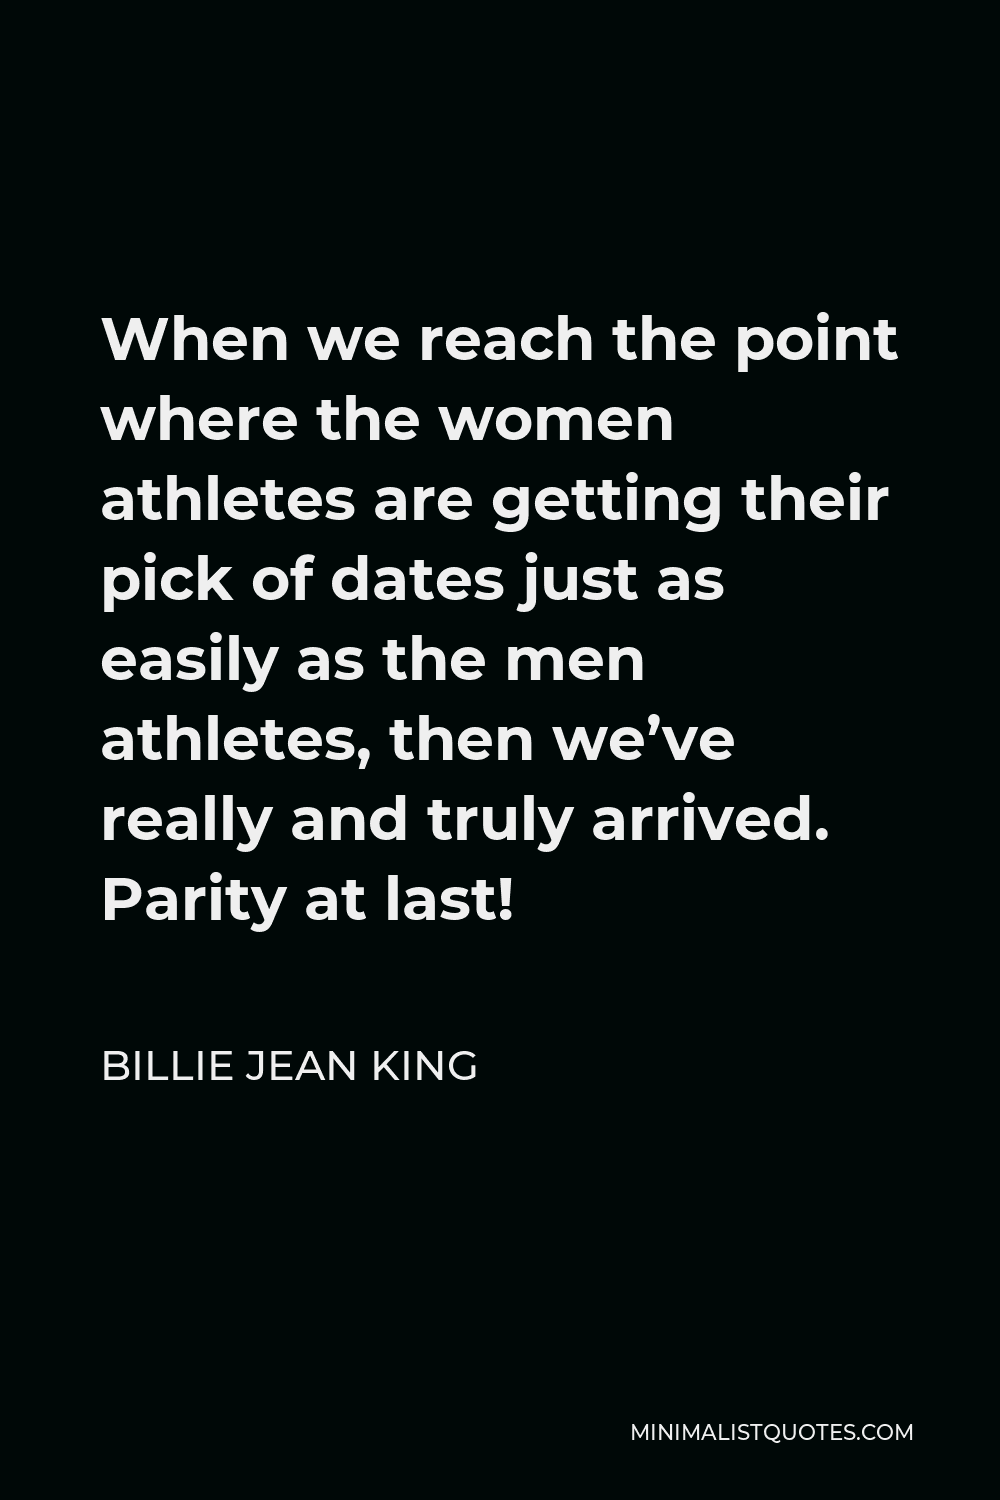 Billie Jean King Quote - When we reach the point where the women athletes are getting their pick of dates just as easily as the men athletes, then we’ve really and truly arrived. Parity at last!